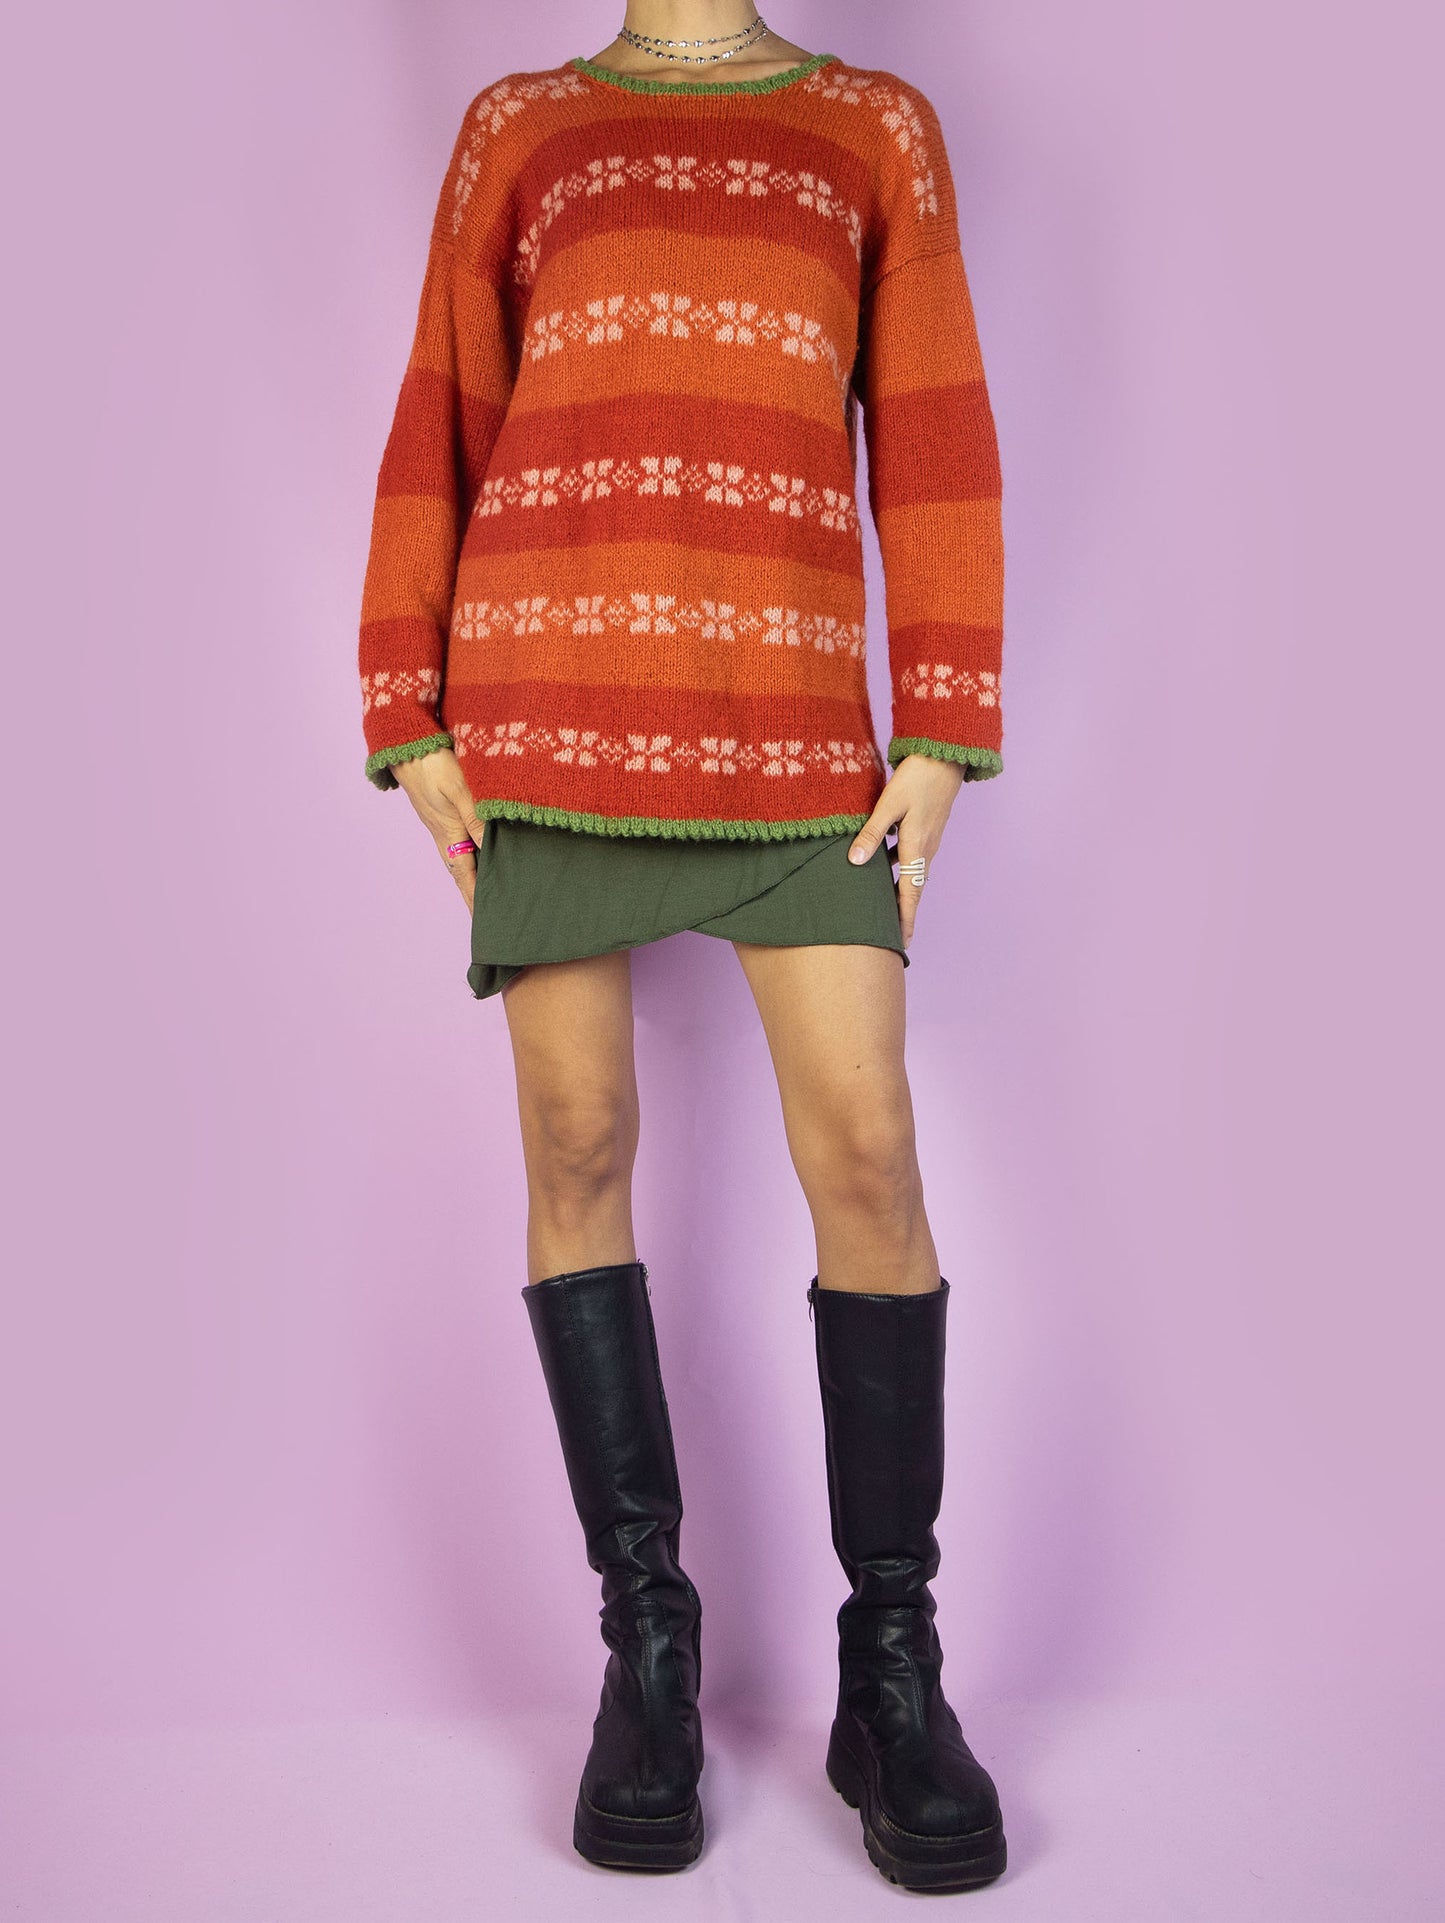 The Vintage 90s Orange Striped Sweater is a winter multicolored orange, white, and green striped pullover.